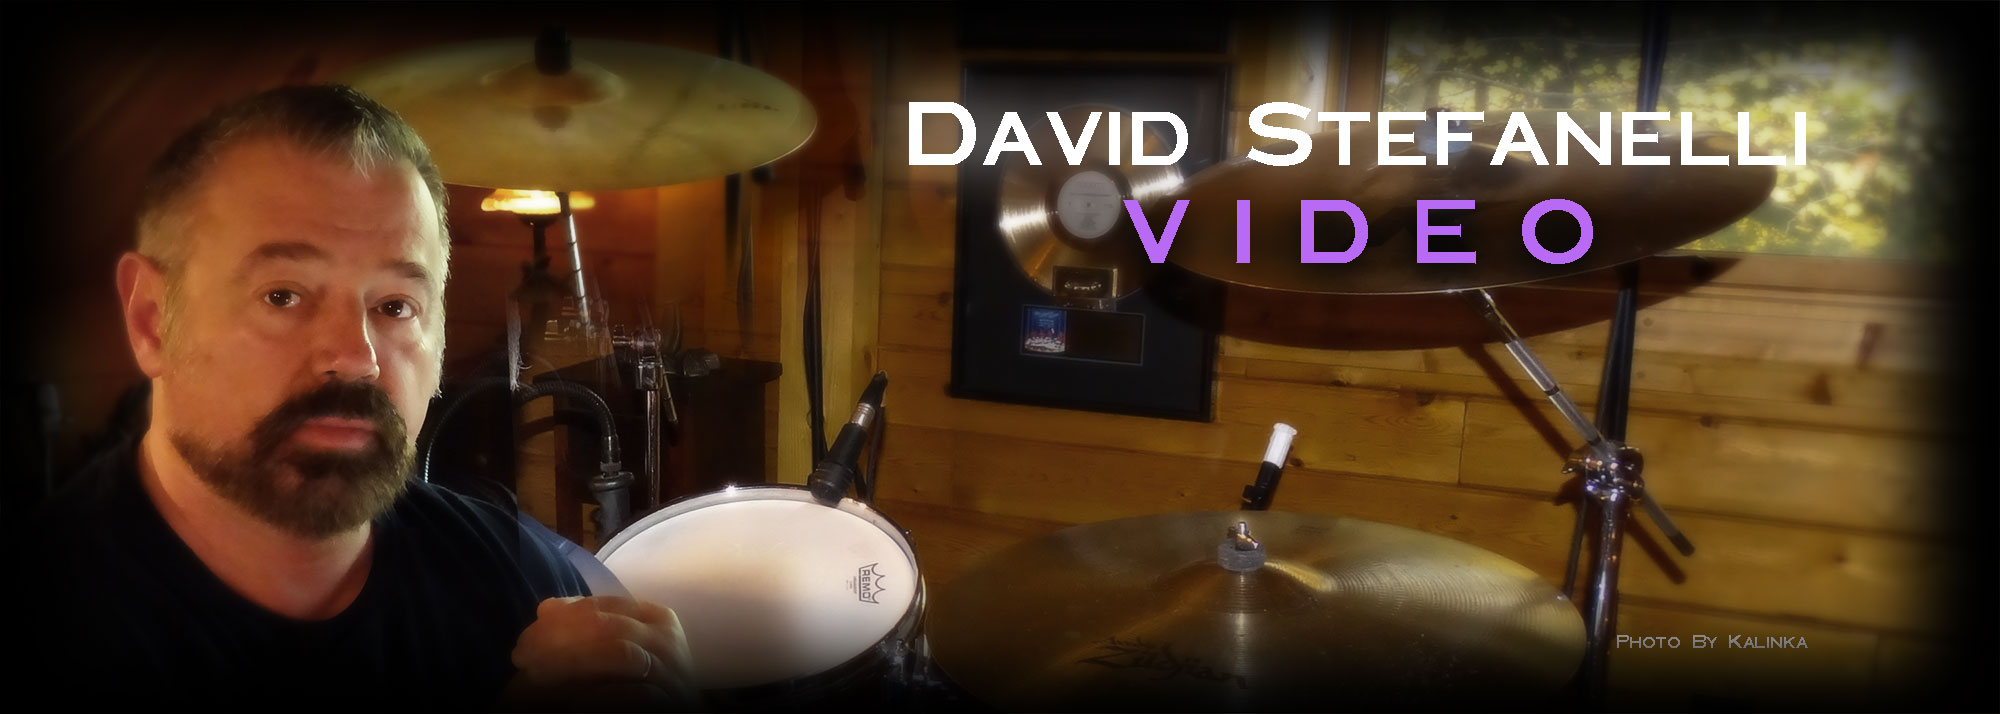 Video of drummer, percussionist, guitarist, and producer, David Stefanelli.